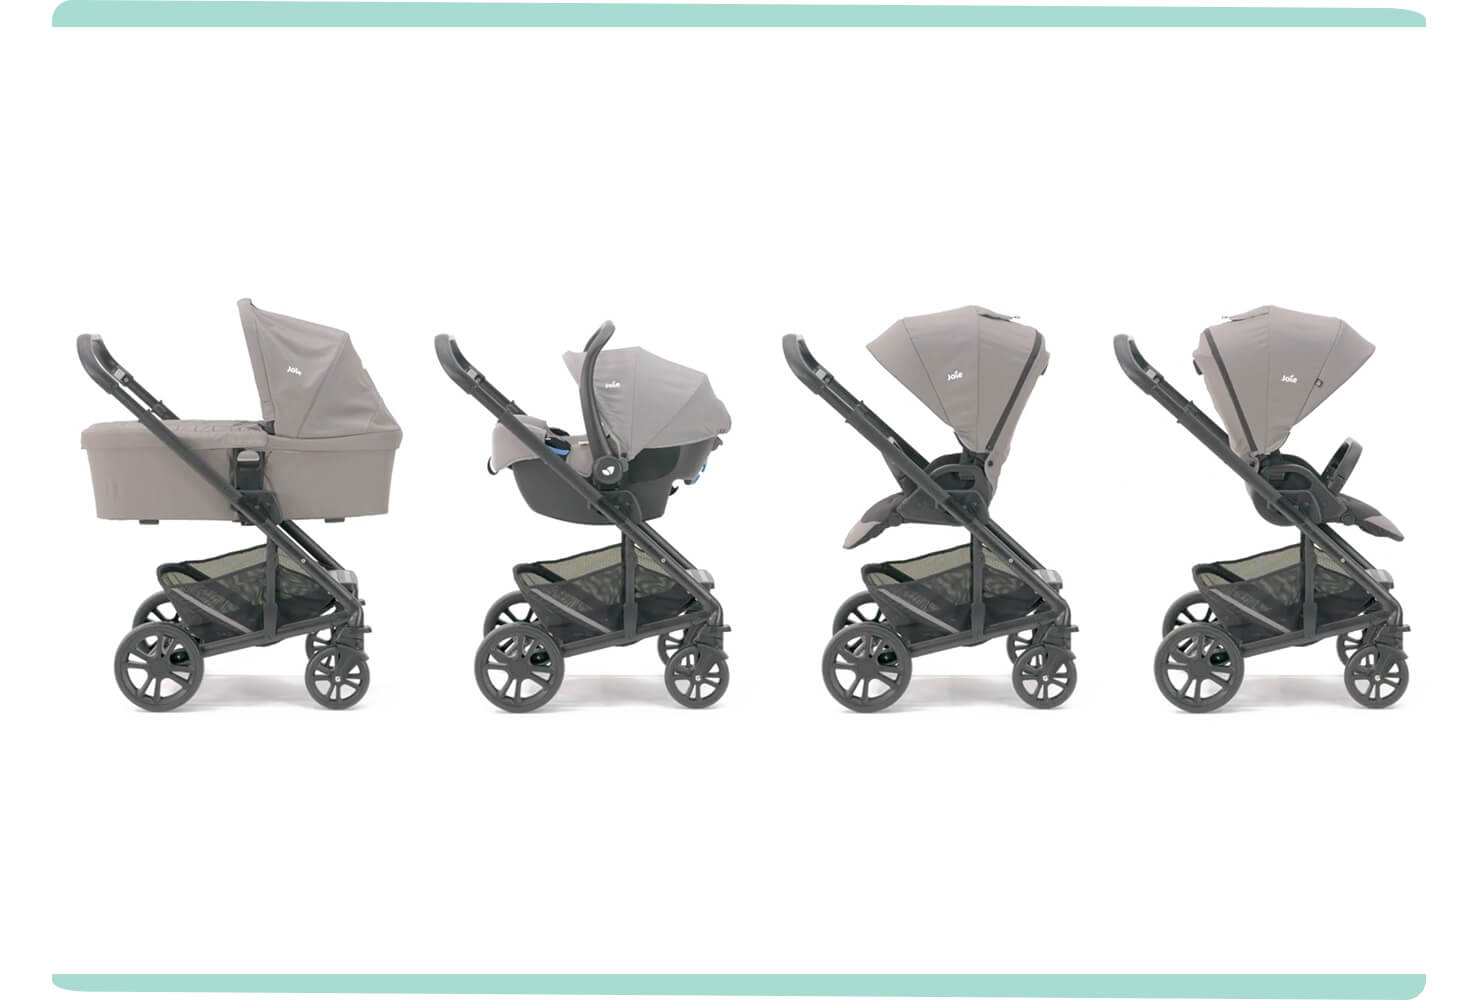  The four modes of the Chrome pram shown in light gray. From left to right: carry cot, infant carrier, parent facing pushchair seat, world facing pushchair seat